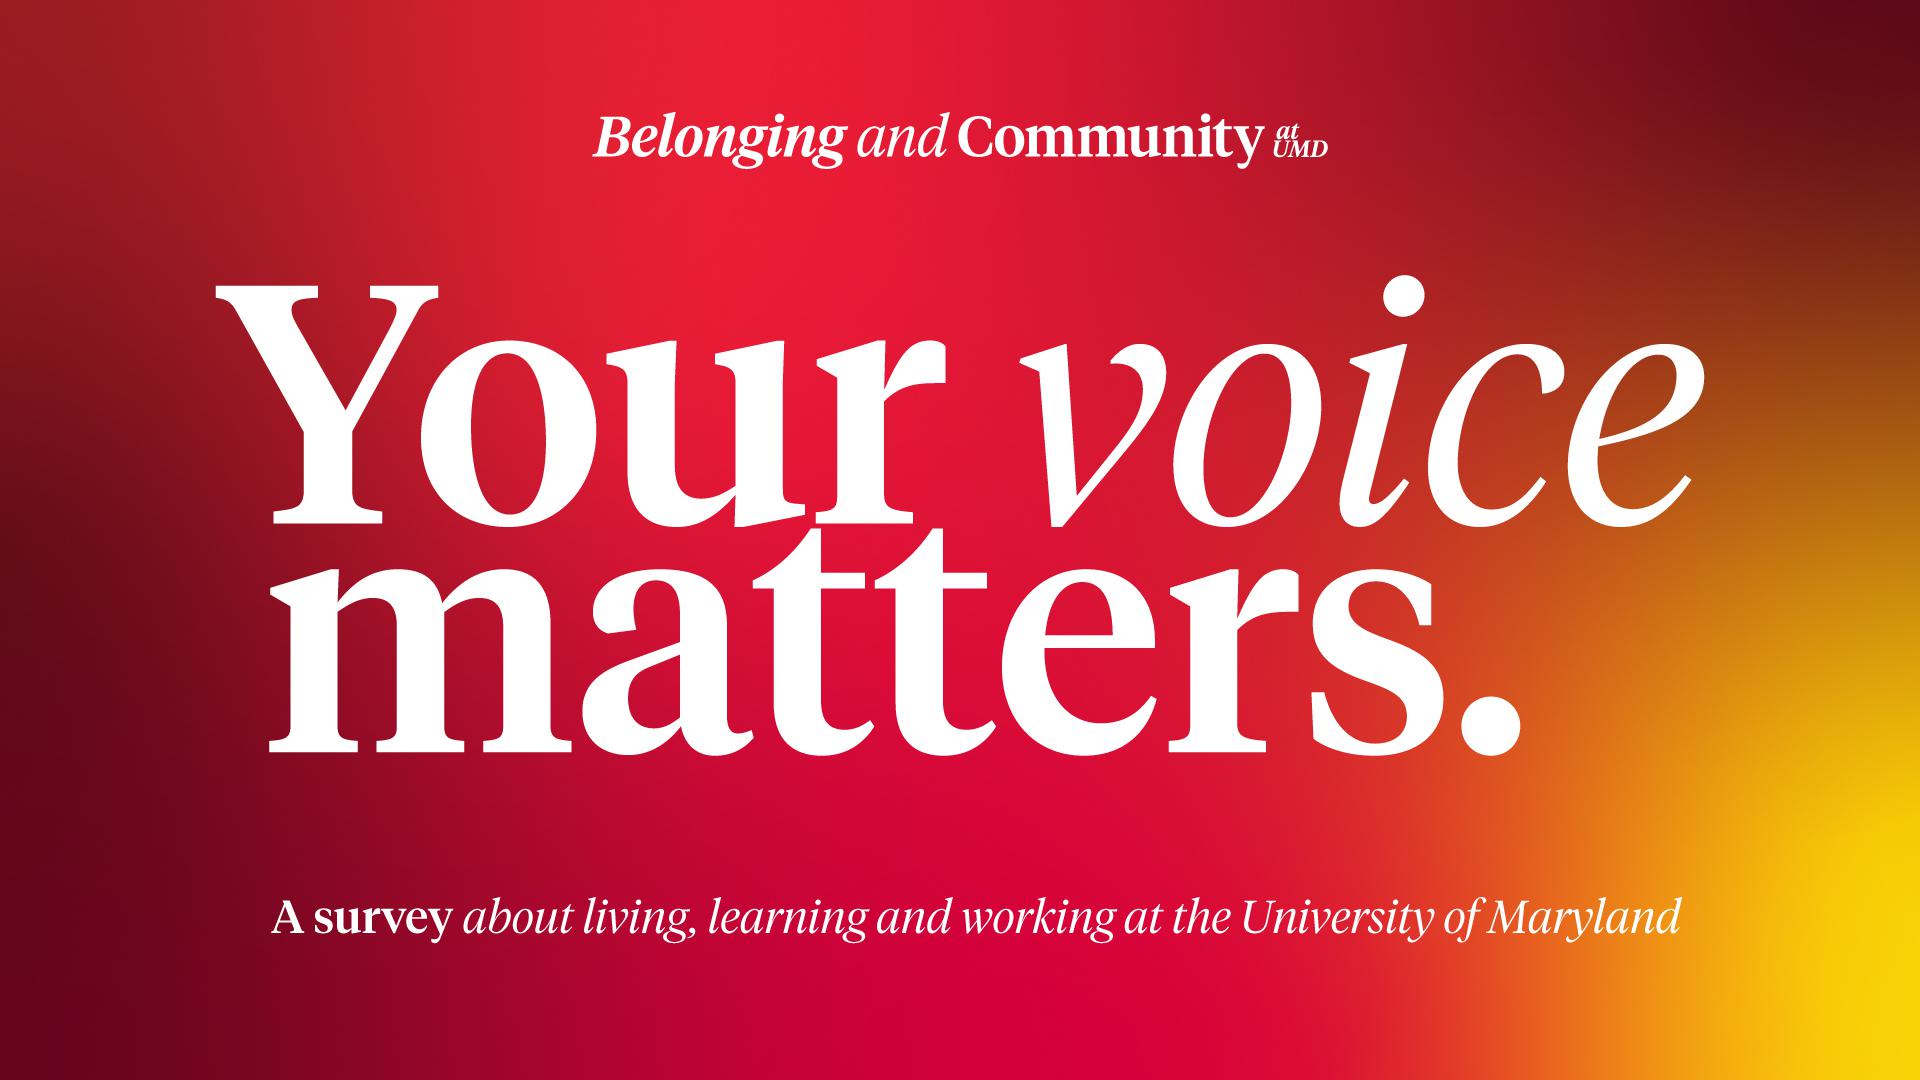 Belonging and Community at UMD | Your voice maters. | A survey about living, learning, and working at the University of Maryland